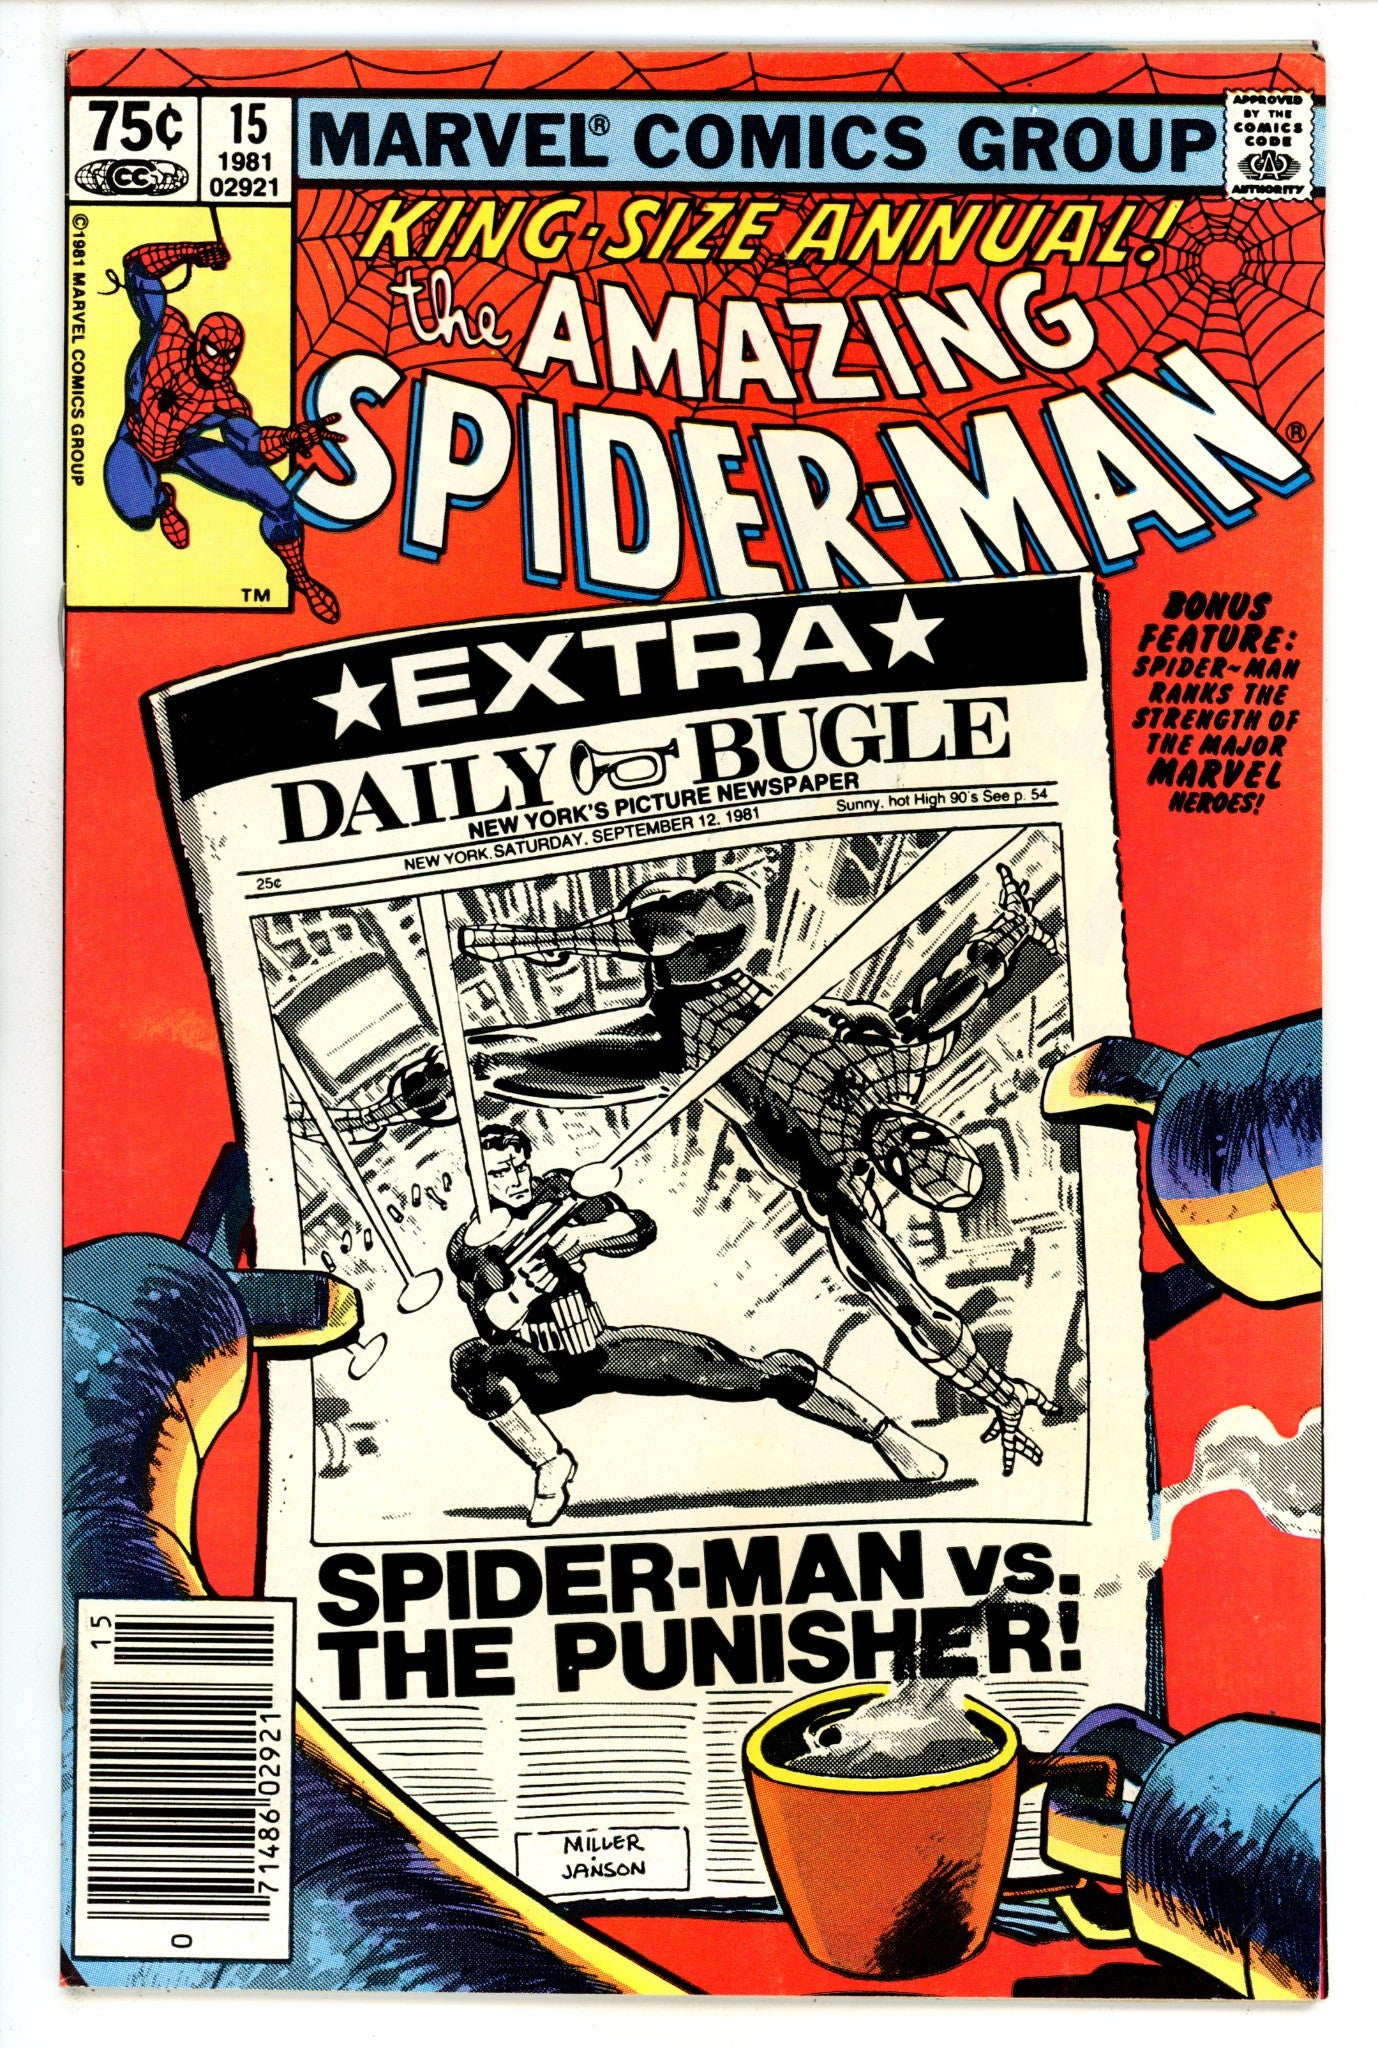 The Amazing Spider-Man Annual Vol 1 15 FN (6.0) (1981) Newsstand 